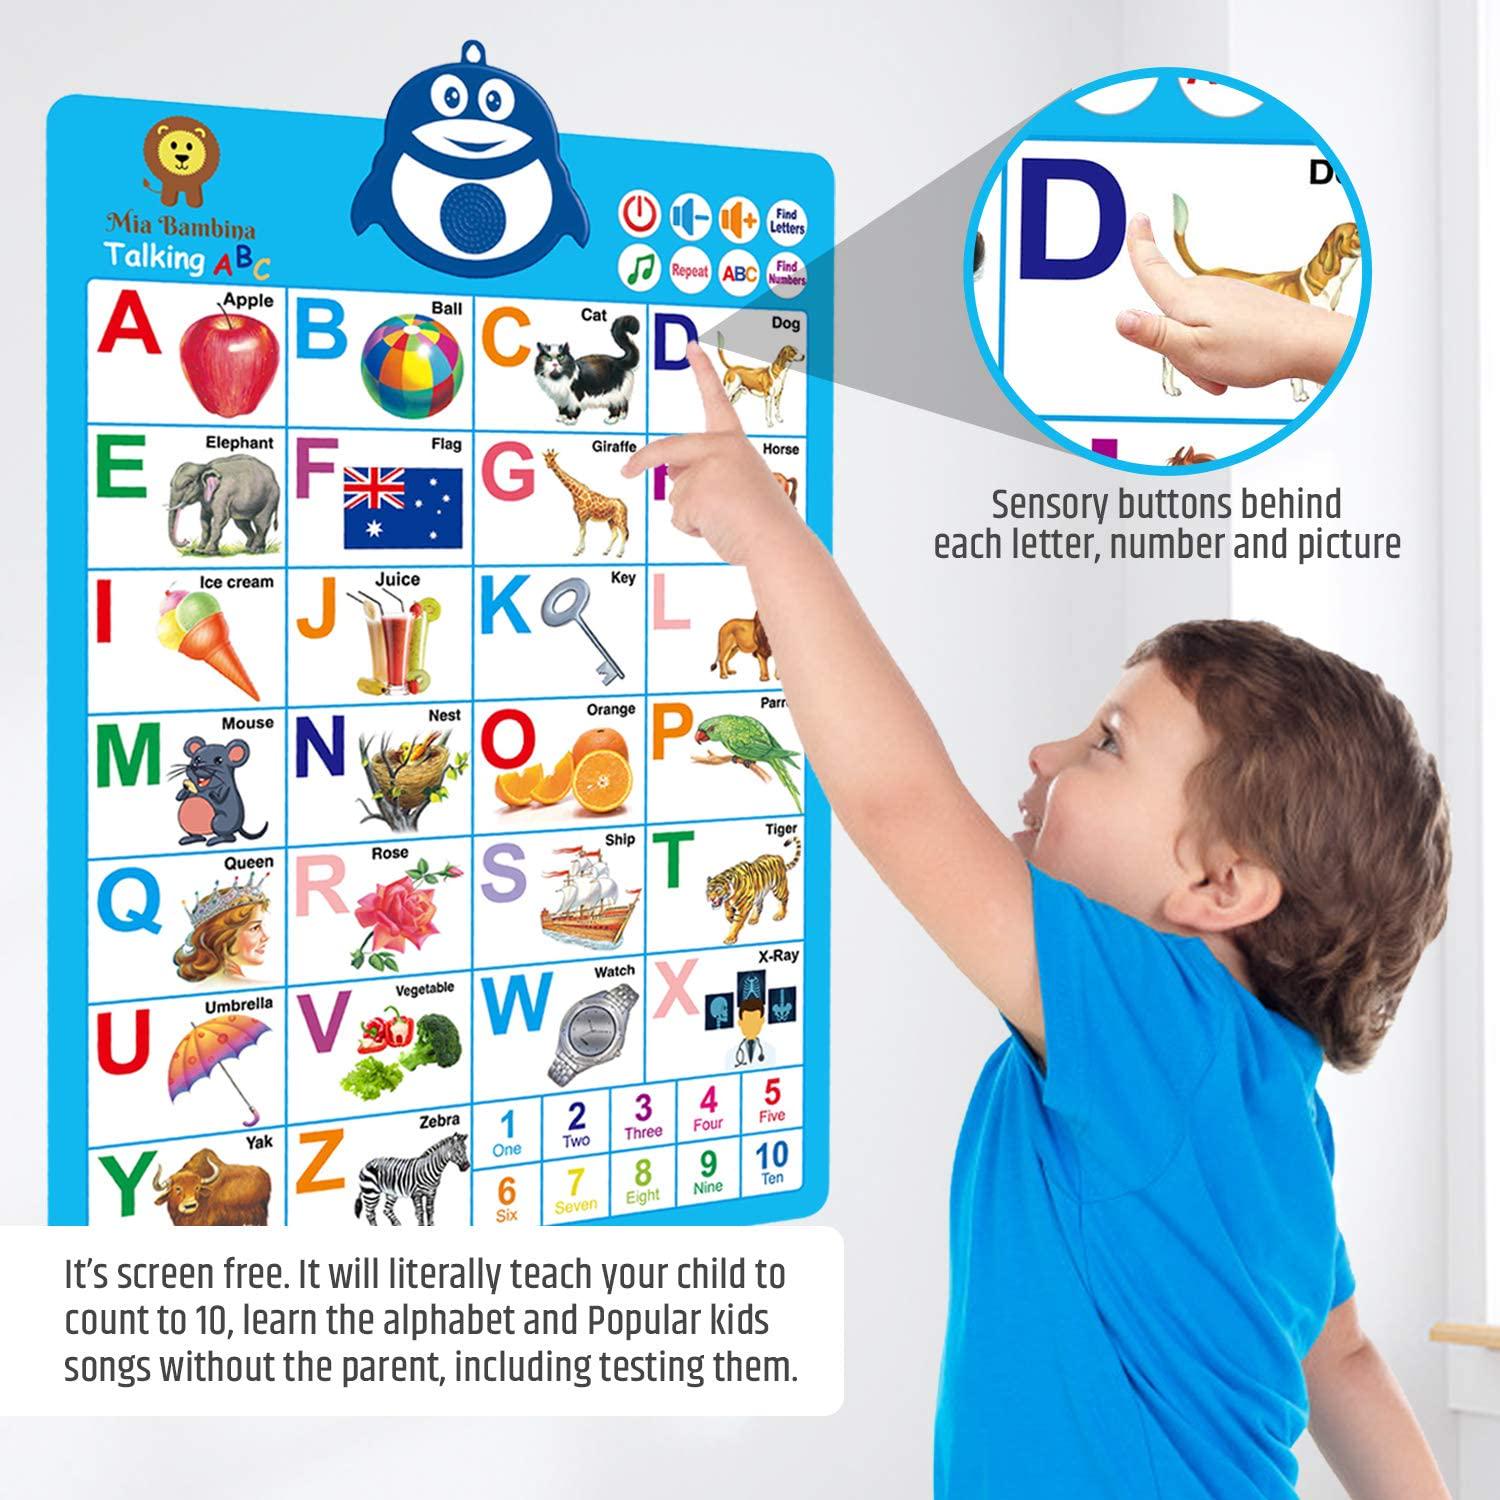 Mia Bambina, Mia Bambina Educational Toys for Toddlers - Electronic ABC Poster | Teaches Tactile Memory, Word Association and Counting | Songs, Intuitive Buttons | Easy to Clean and Durable